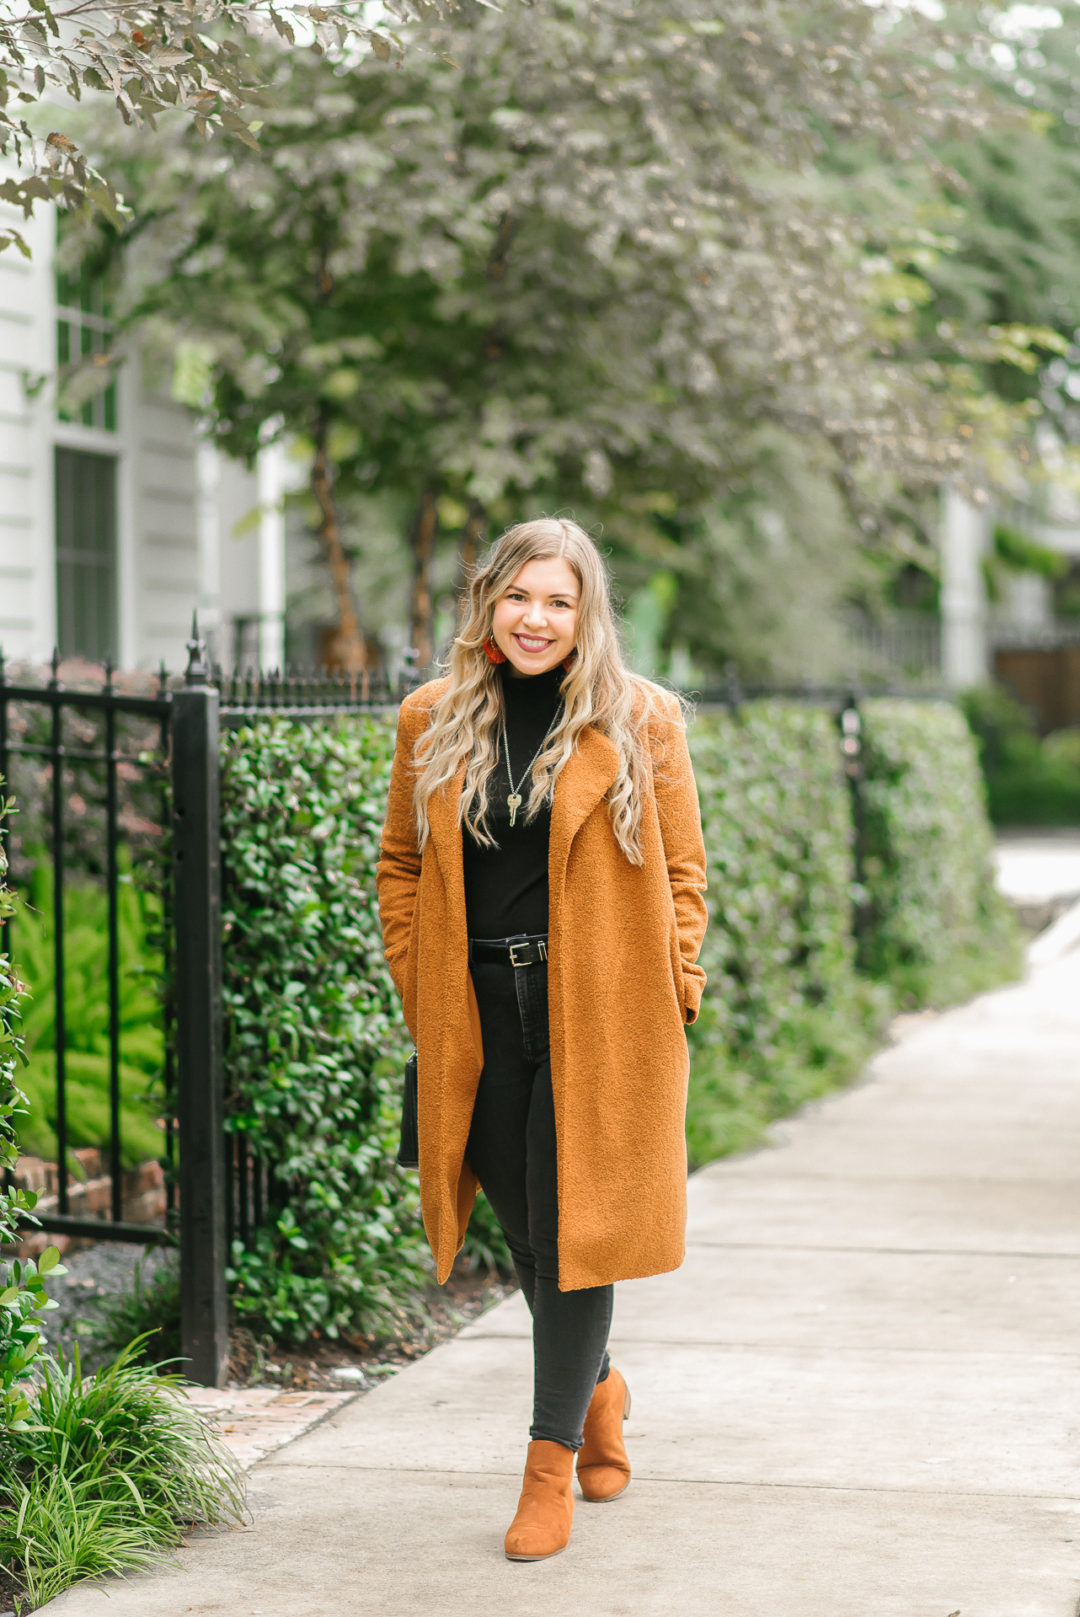 How to Style Brown Teddy Coat and Black Jeans - Fall Fashion on Cup of Charisma